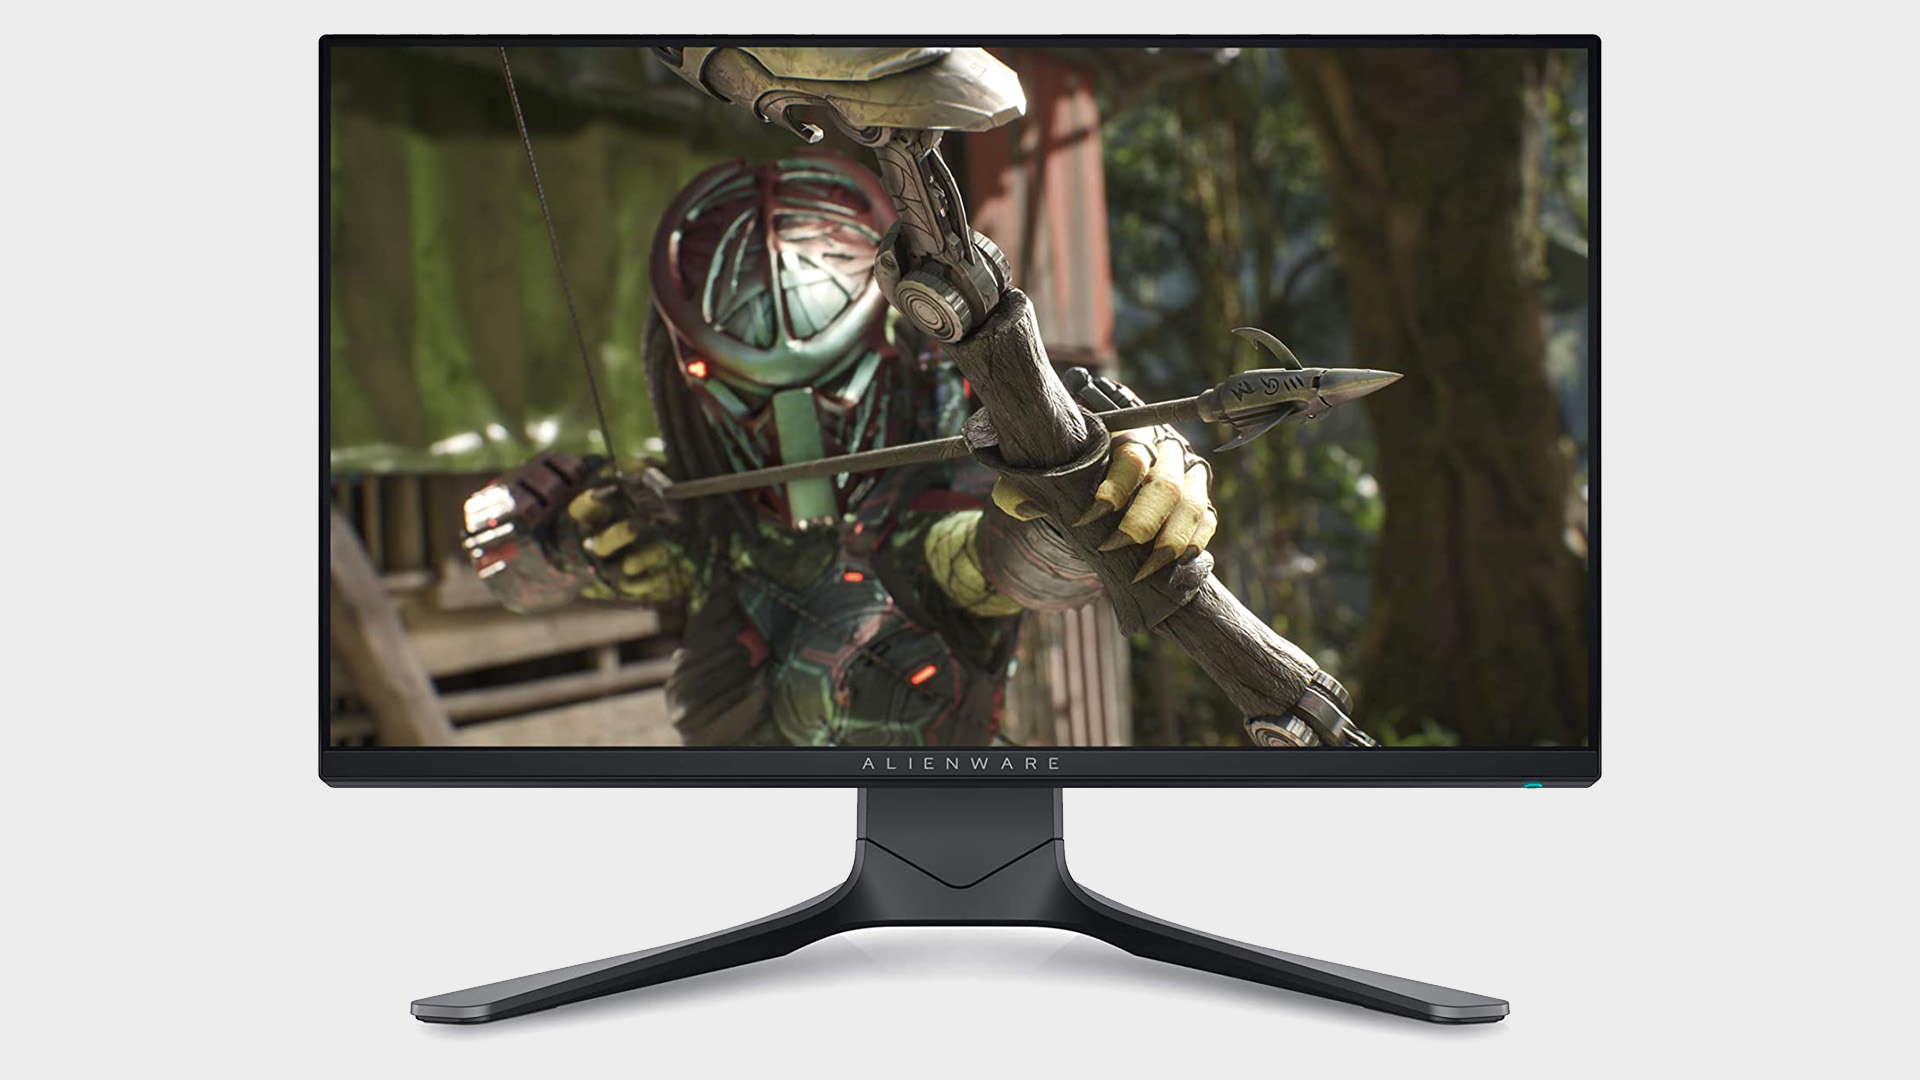 Alienware AW2521H high refresh rate gaming monitor